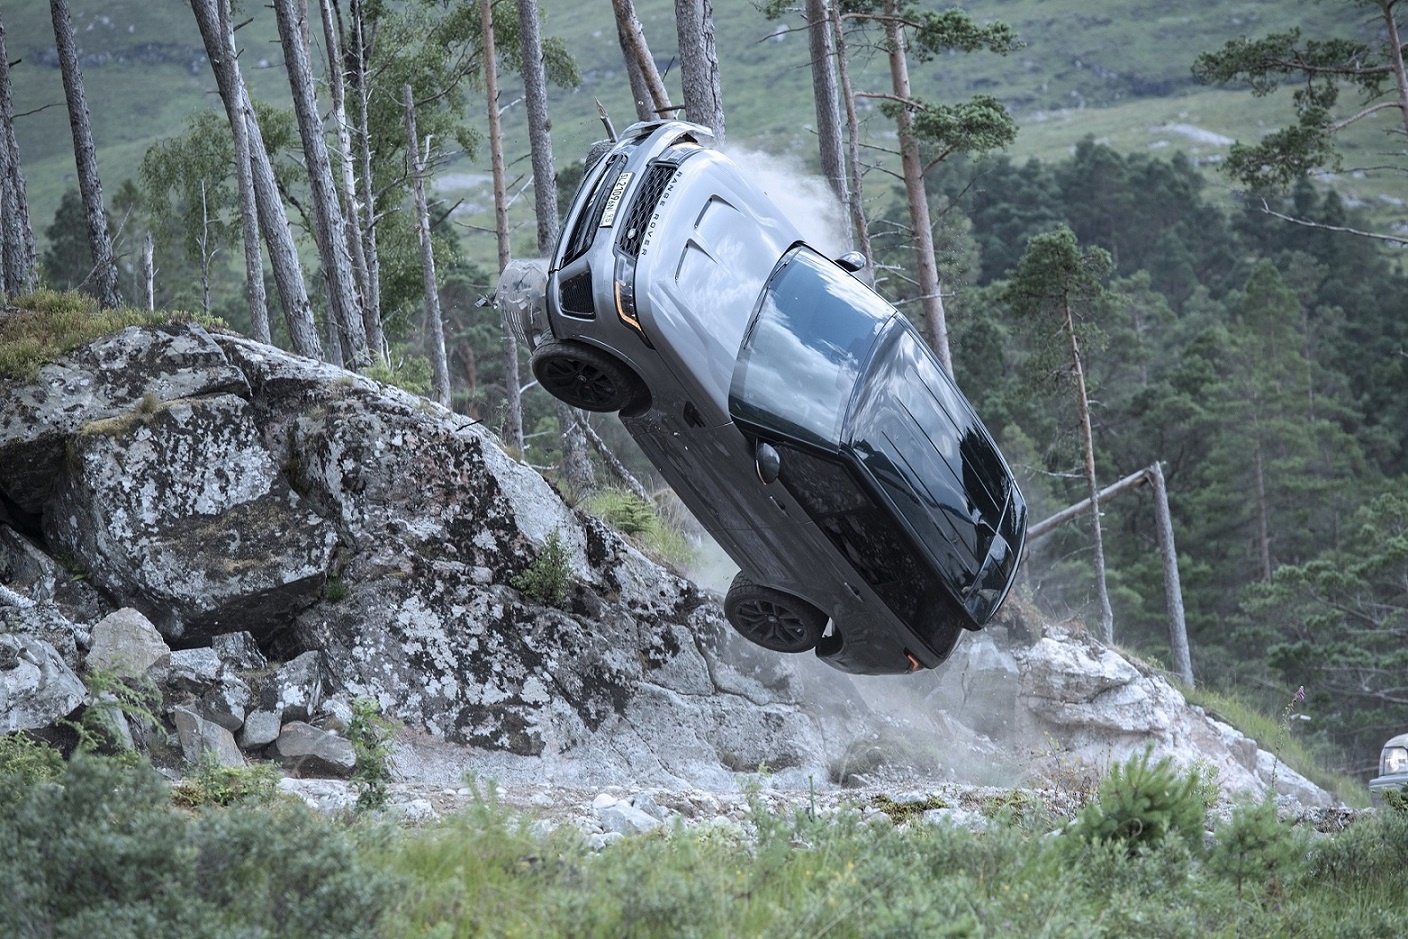 New Behind-The-Scenes Footage Shows Range Rover Sport Svr Preparing To Make An Impact In New James Bond Film